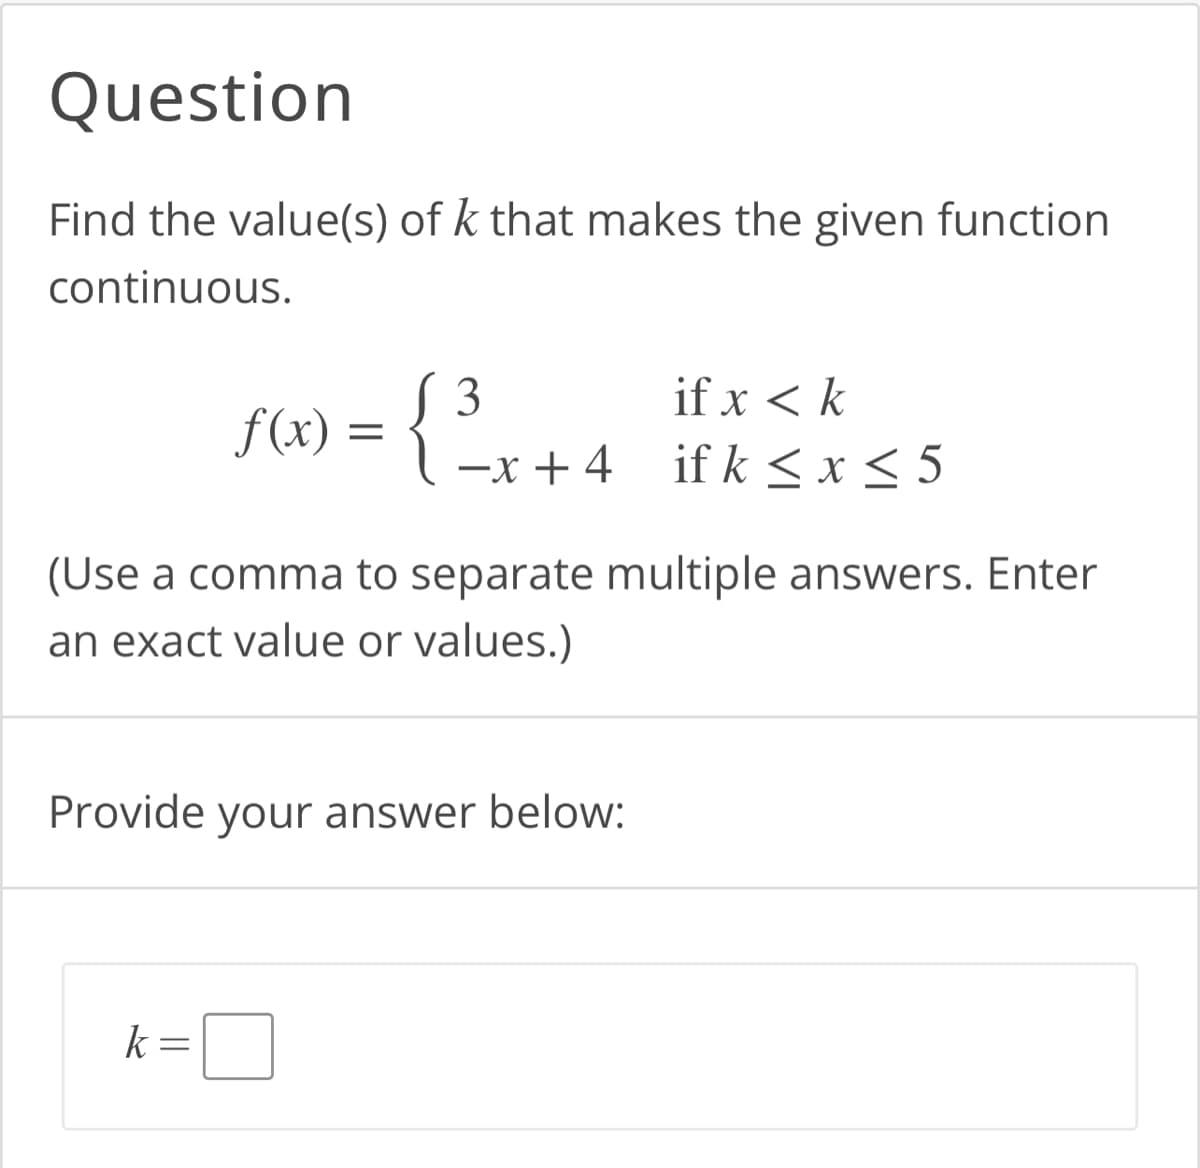 Question
Find the value(s) of k that makes the given function
continuous.
3
f(x) = {
{³
-x+4
k=
(Use a comma to separate multiple answers. Enter
an exact value or values.)
Provide your answer below:
if x < k
ifk ≤ x ≤ 5